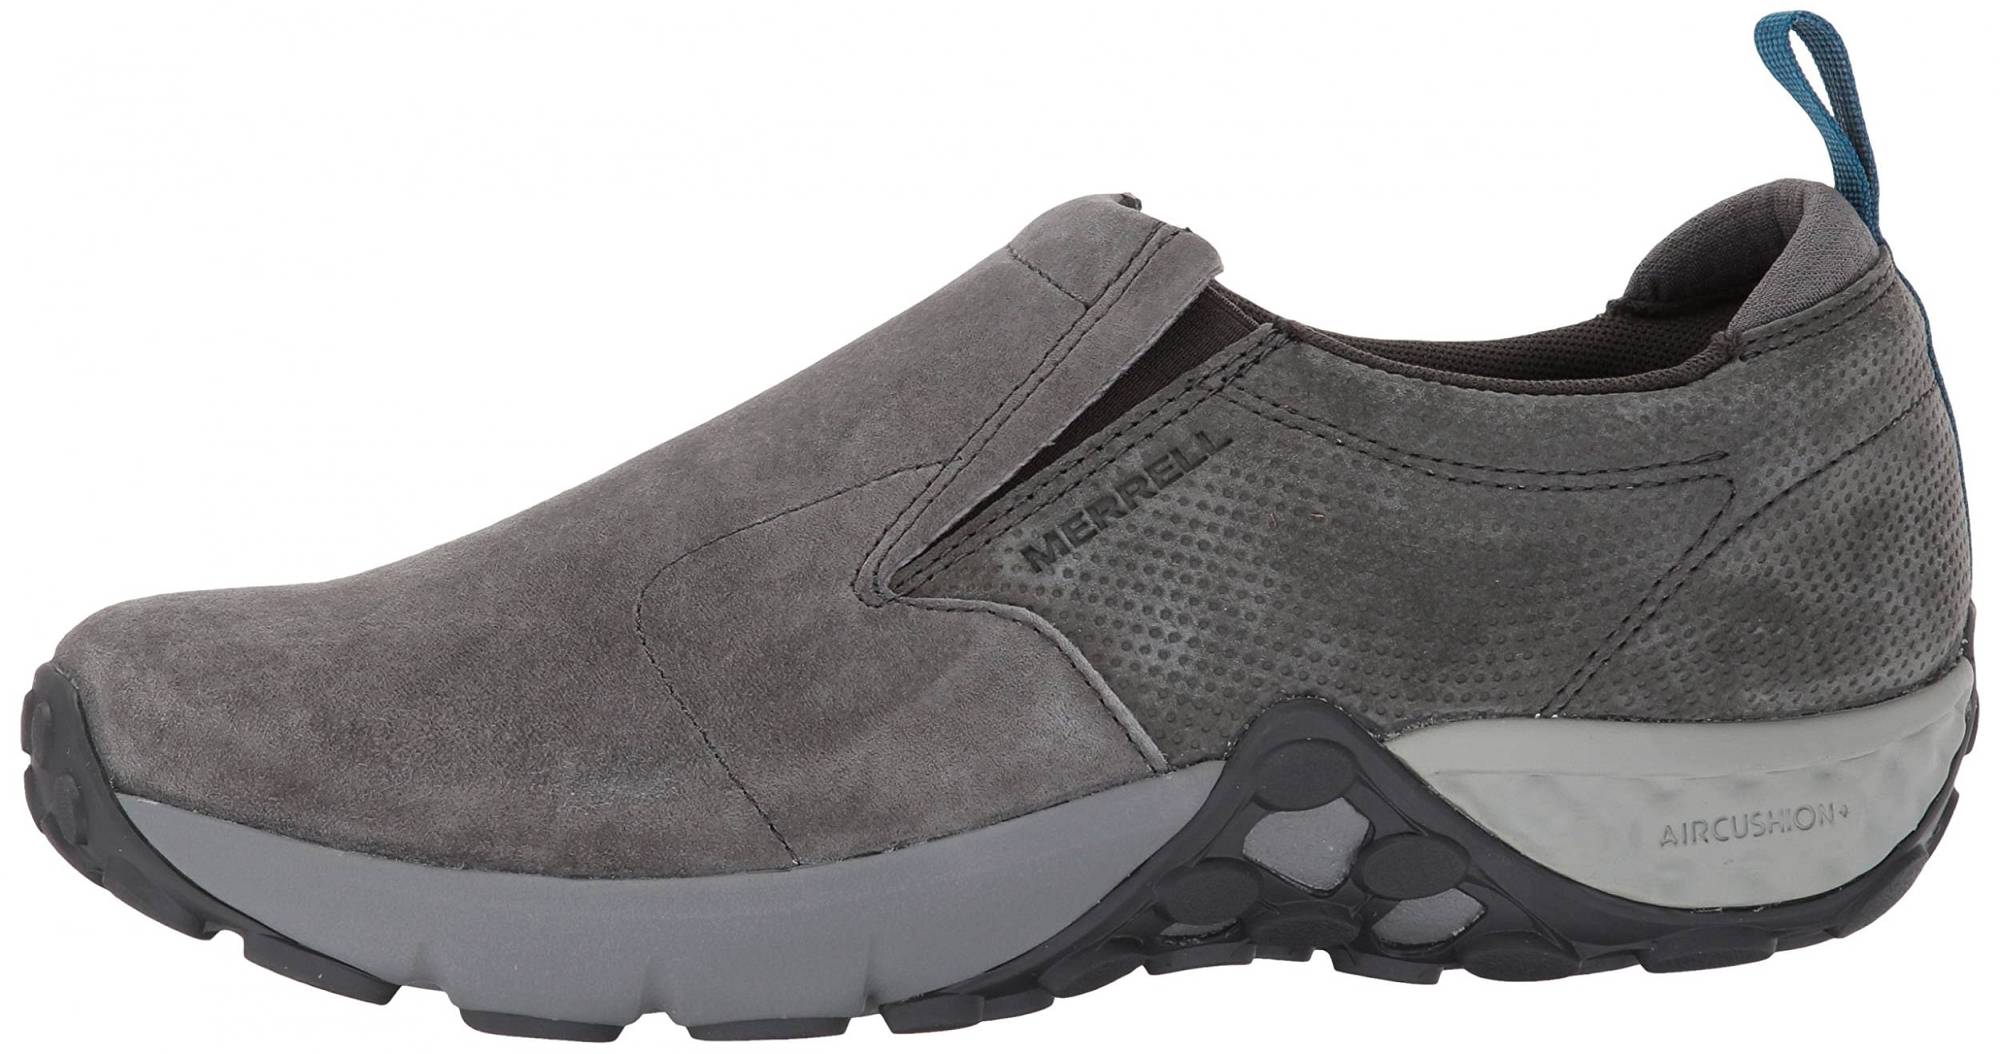 Merrell Jungle Moc AC+ – Shoes Reviews & Reasons To Buy